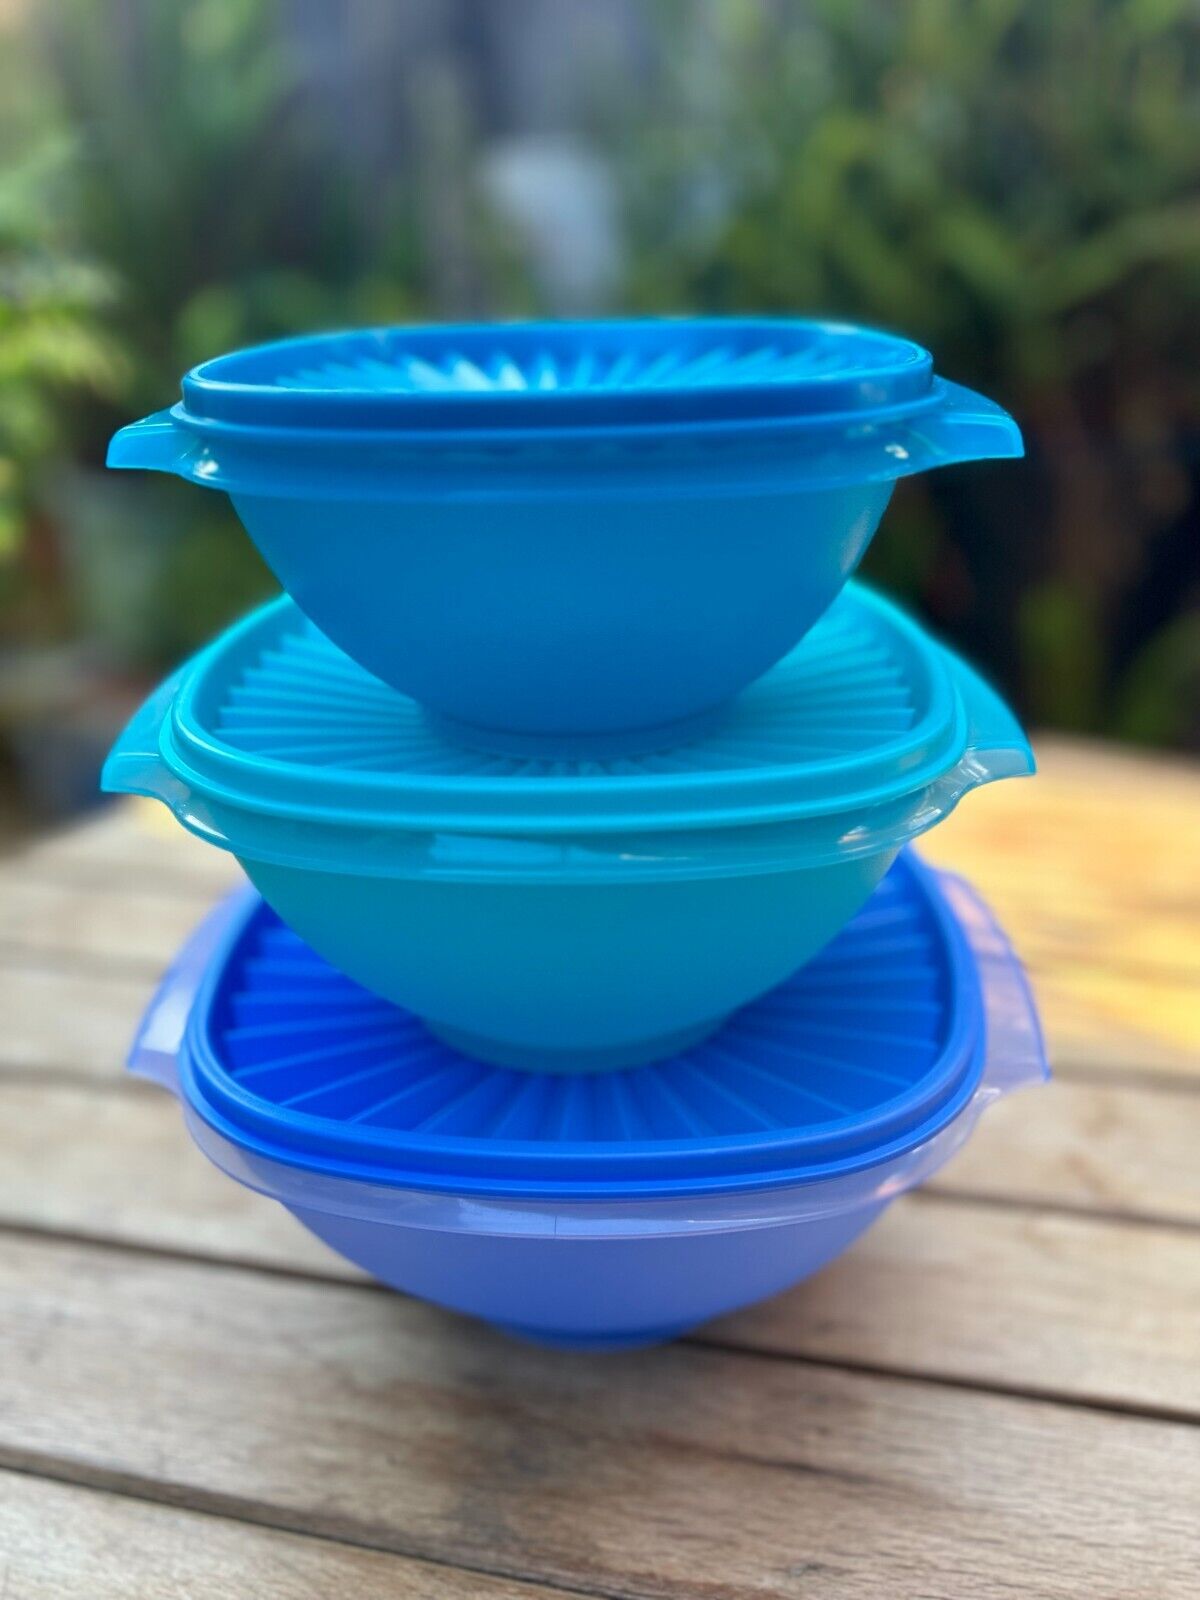 Tupperware New Classic Servalier Bowls Set of 3 Shades of Blue Serving & Mixing